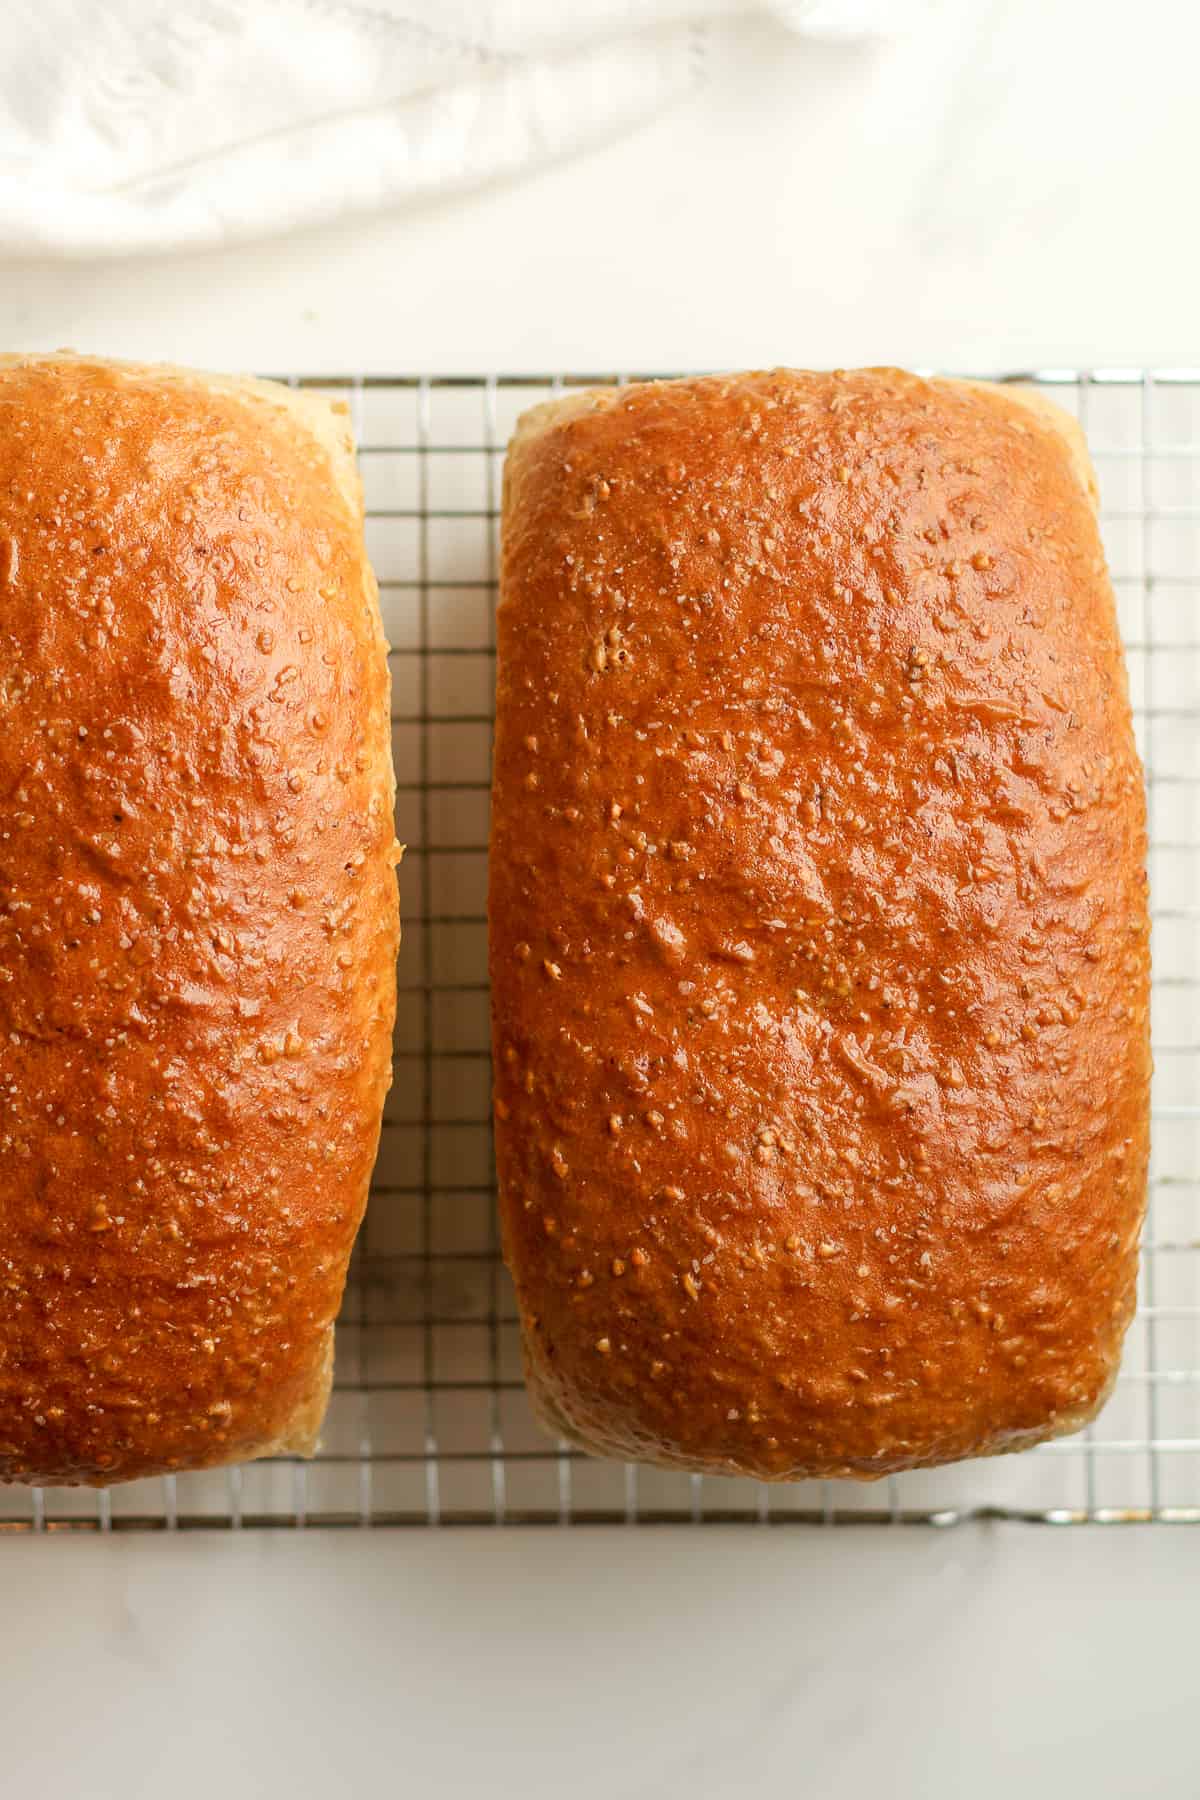 Overhead shot of two loaves of cracked wheat bread.